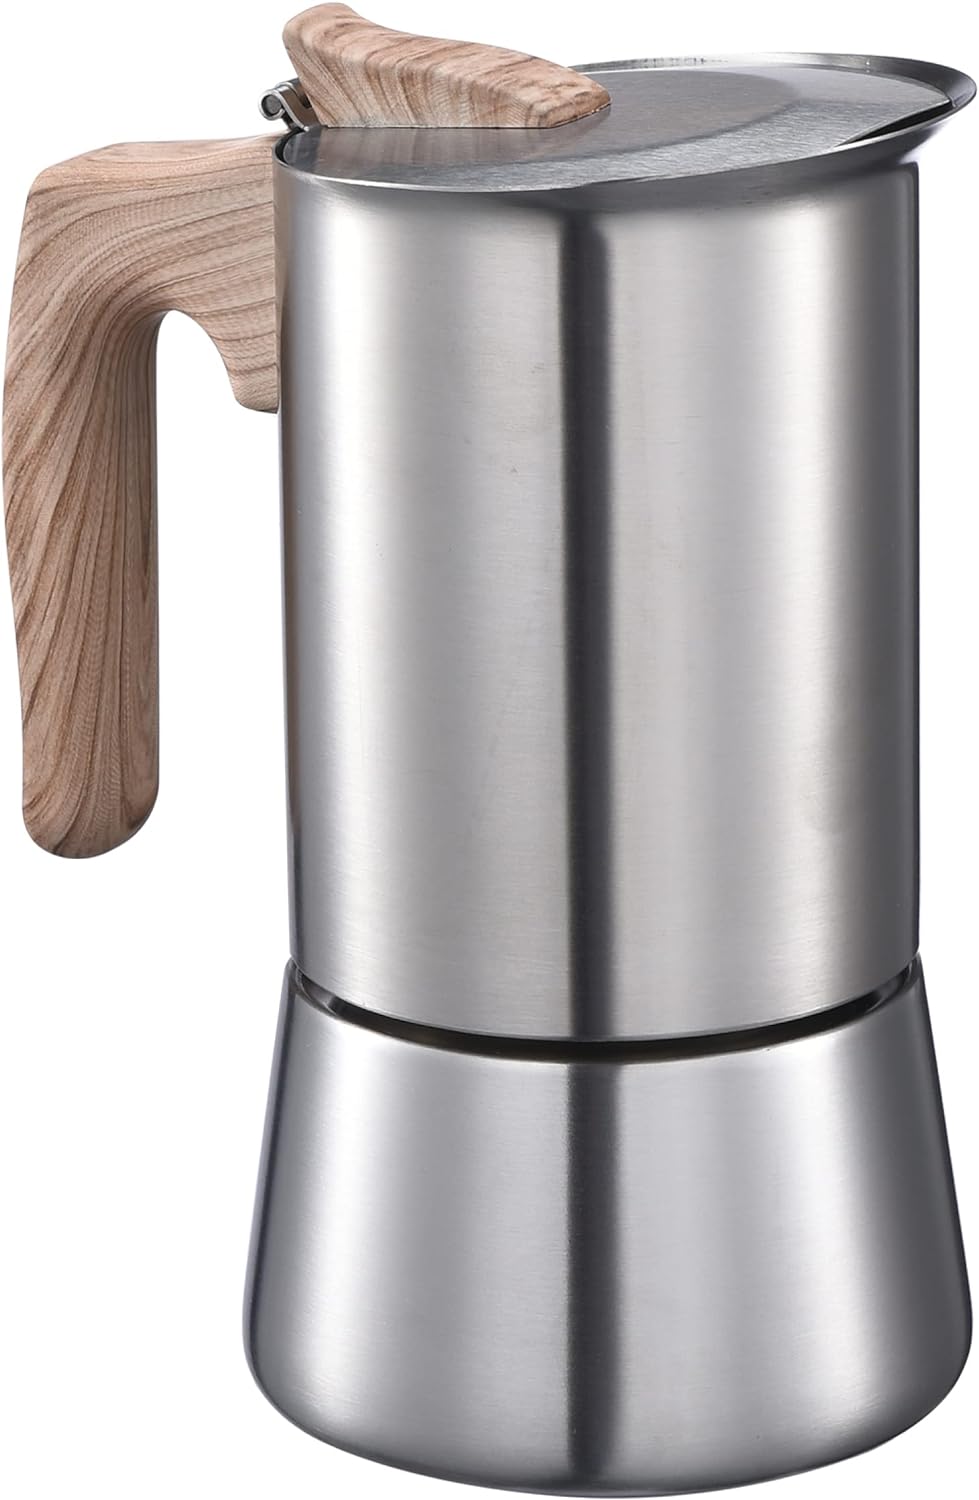 Bruntmor Stovetop Espresso Maker - Italian Coffee Pot, Stainless Steel - 5.51 D x 3.85 W x 7.48 H - For Stove Top, Induction, Gas, Electric - Thermal Express Moka, Cappuccino Pots